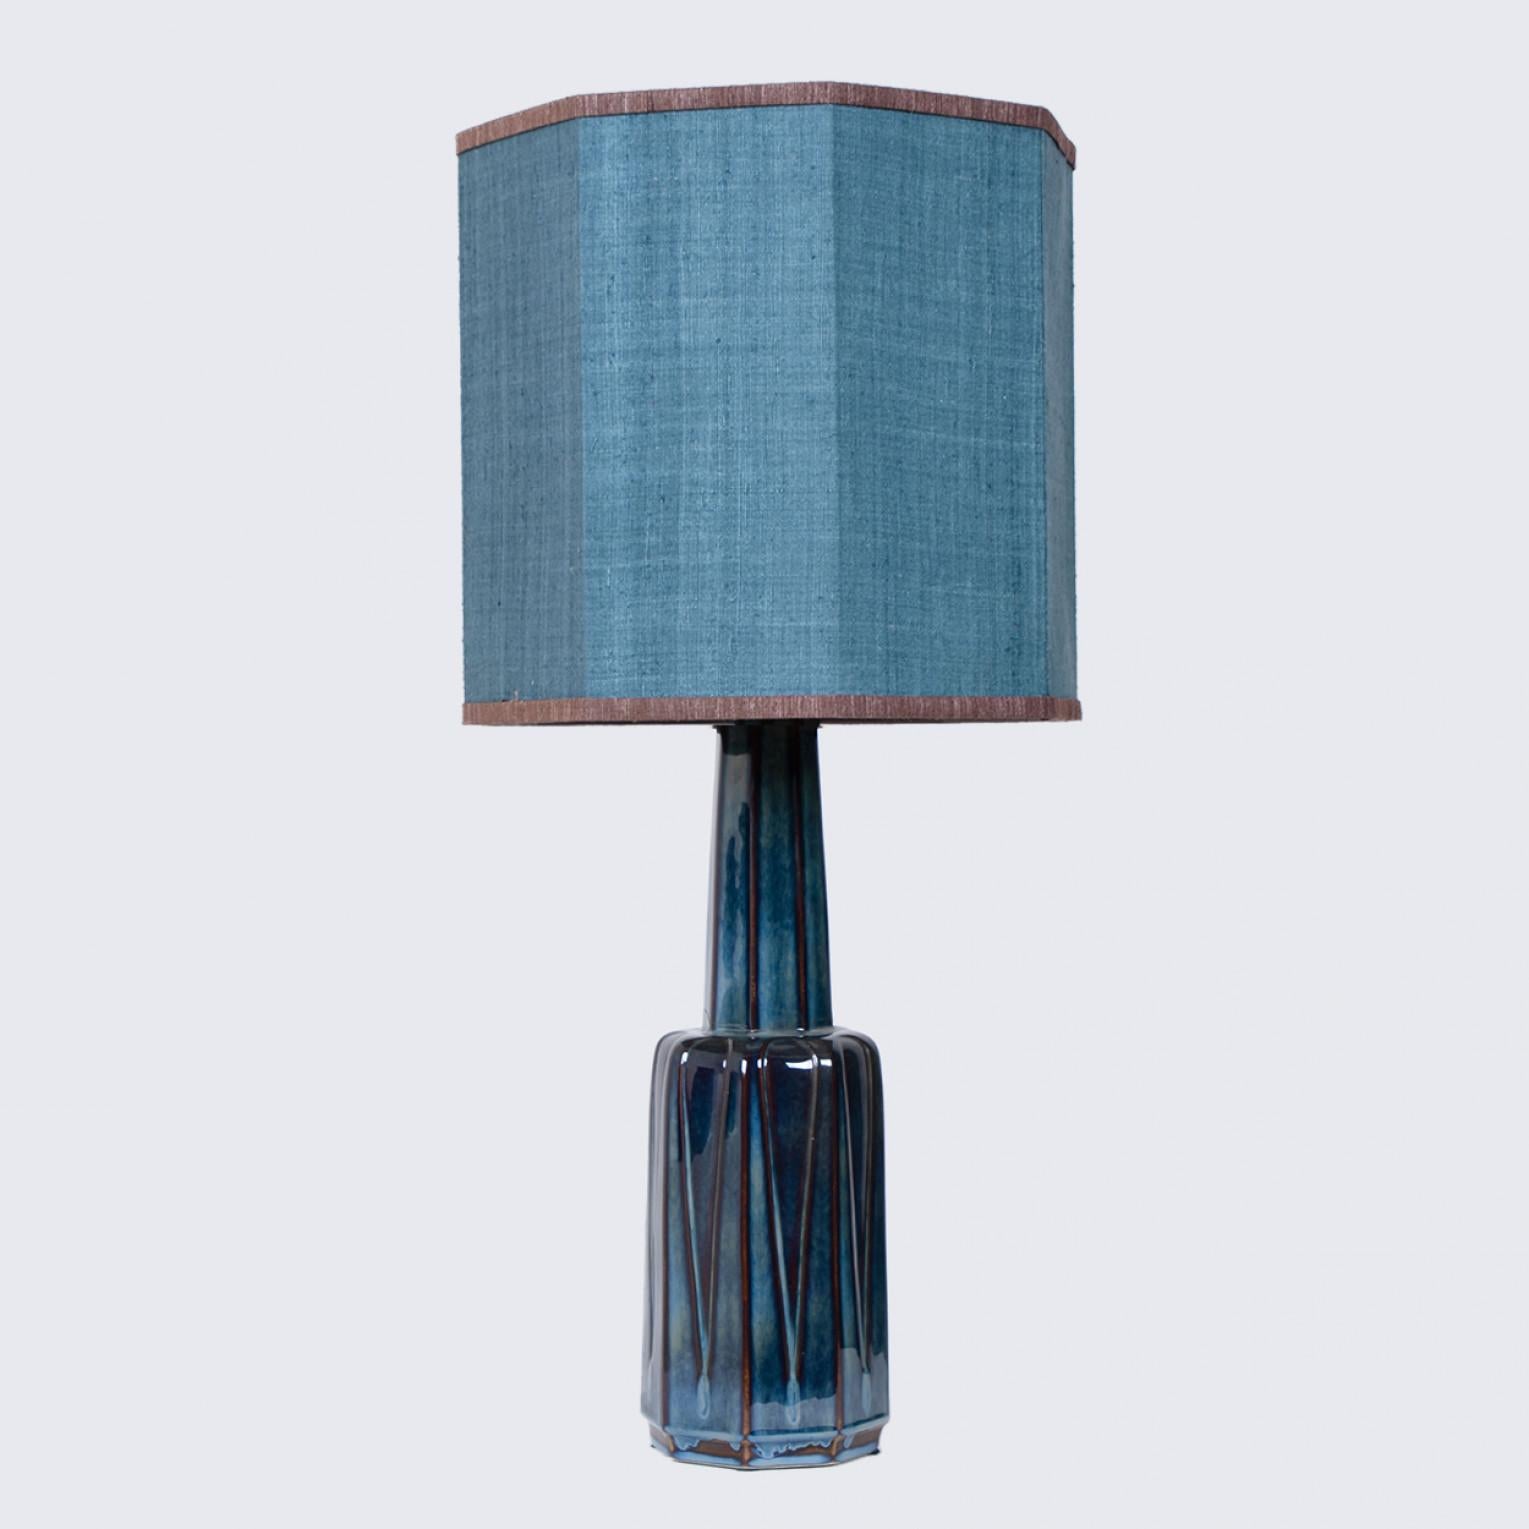 Other 1 of the 2 Large Soholm Lamp with New Blue Silk Custom Made Lampshade Houben, 19 For Sale